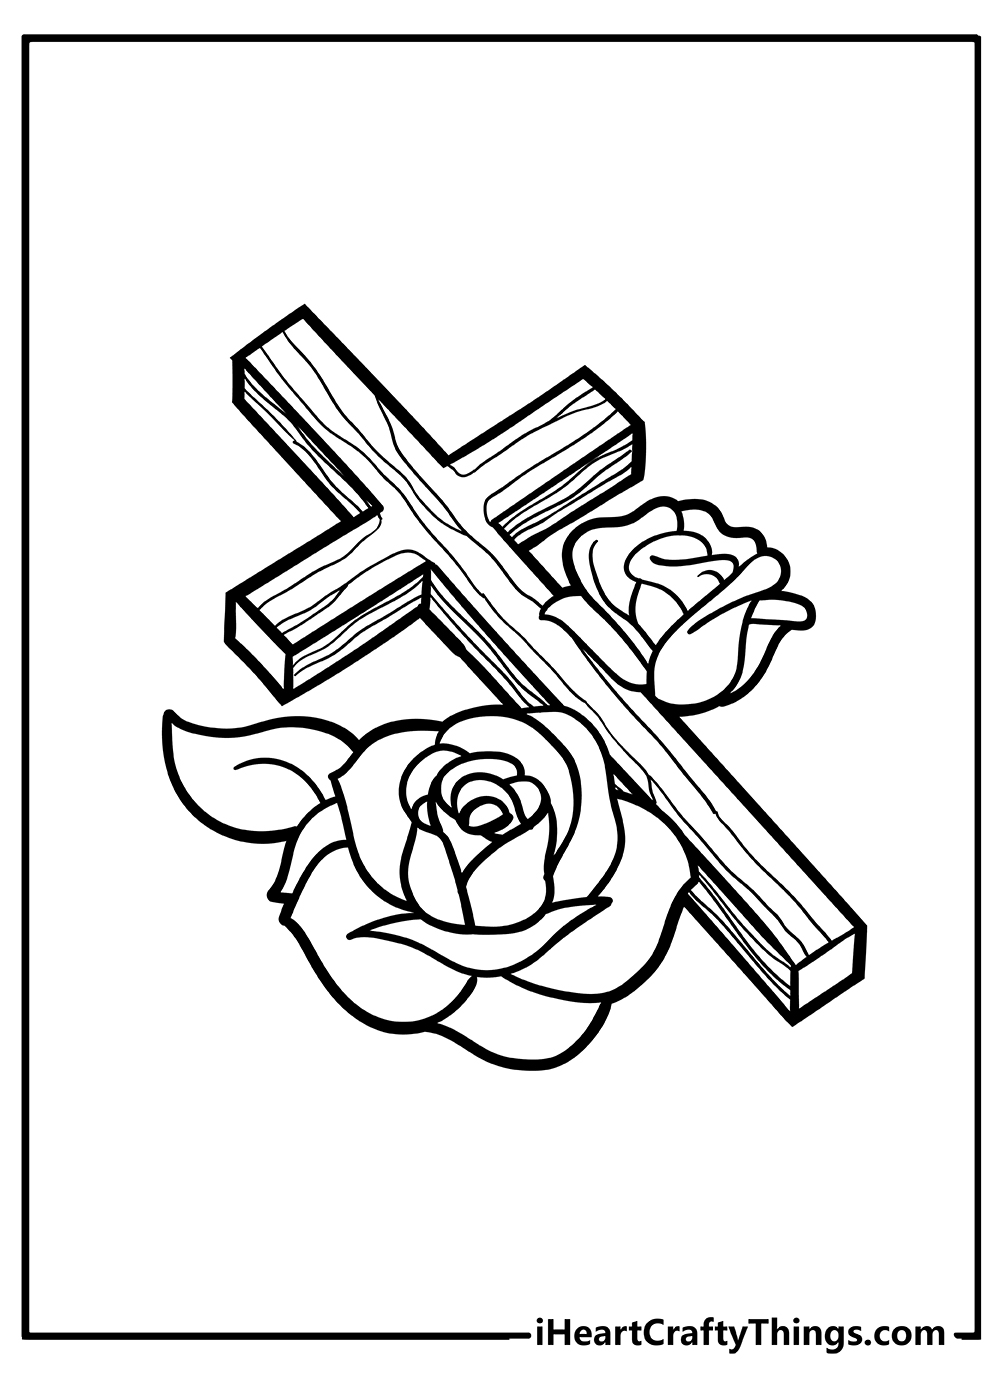 Cross Coloring Book for adults free download